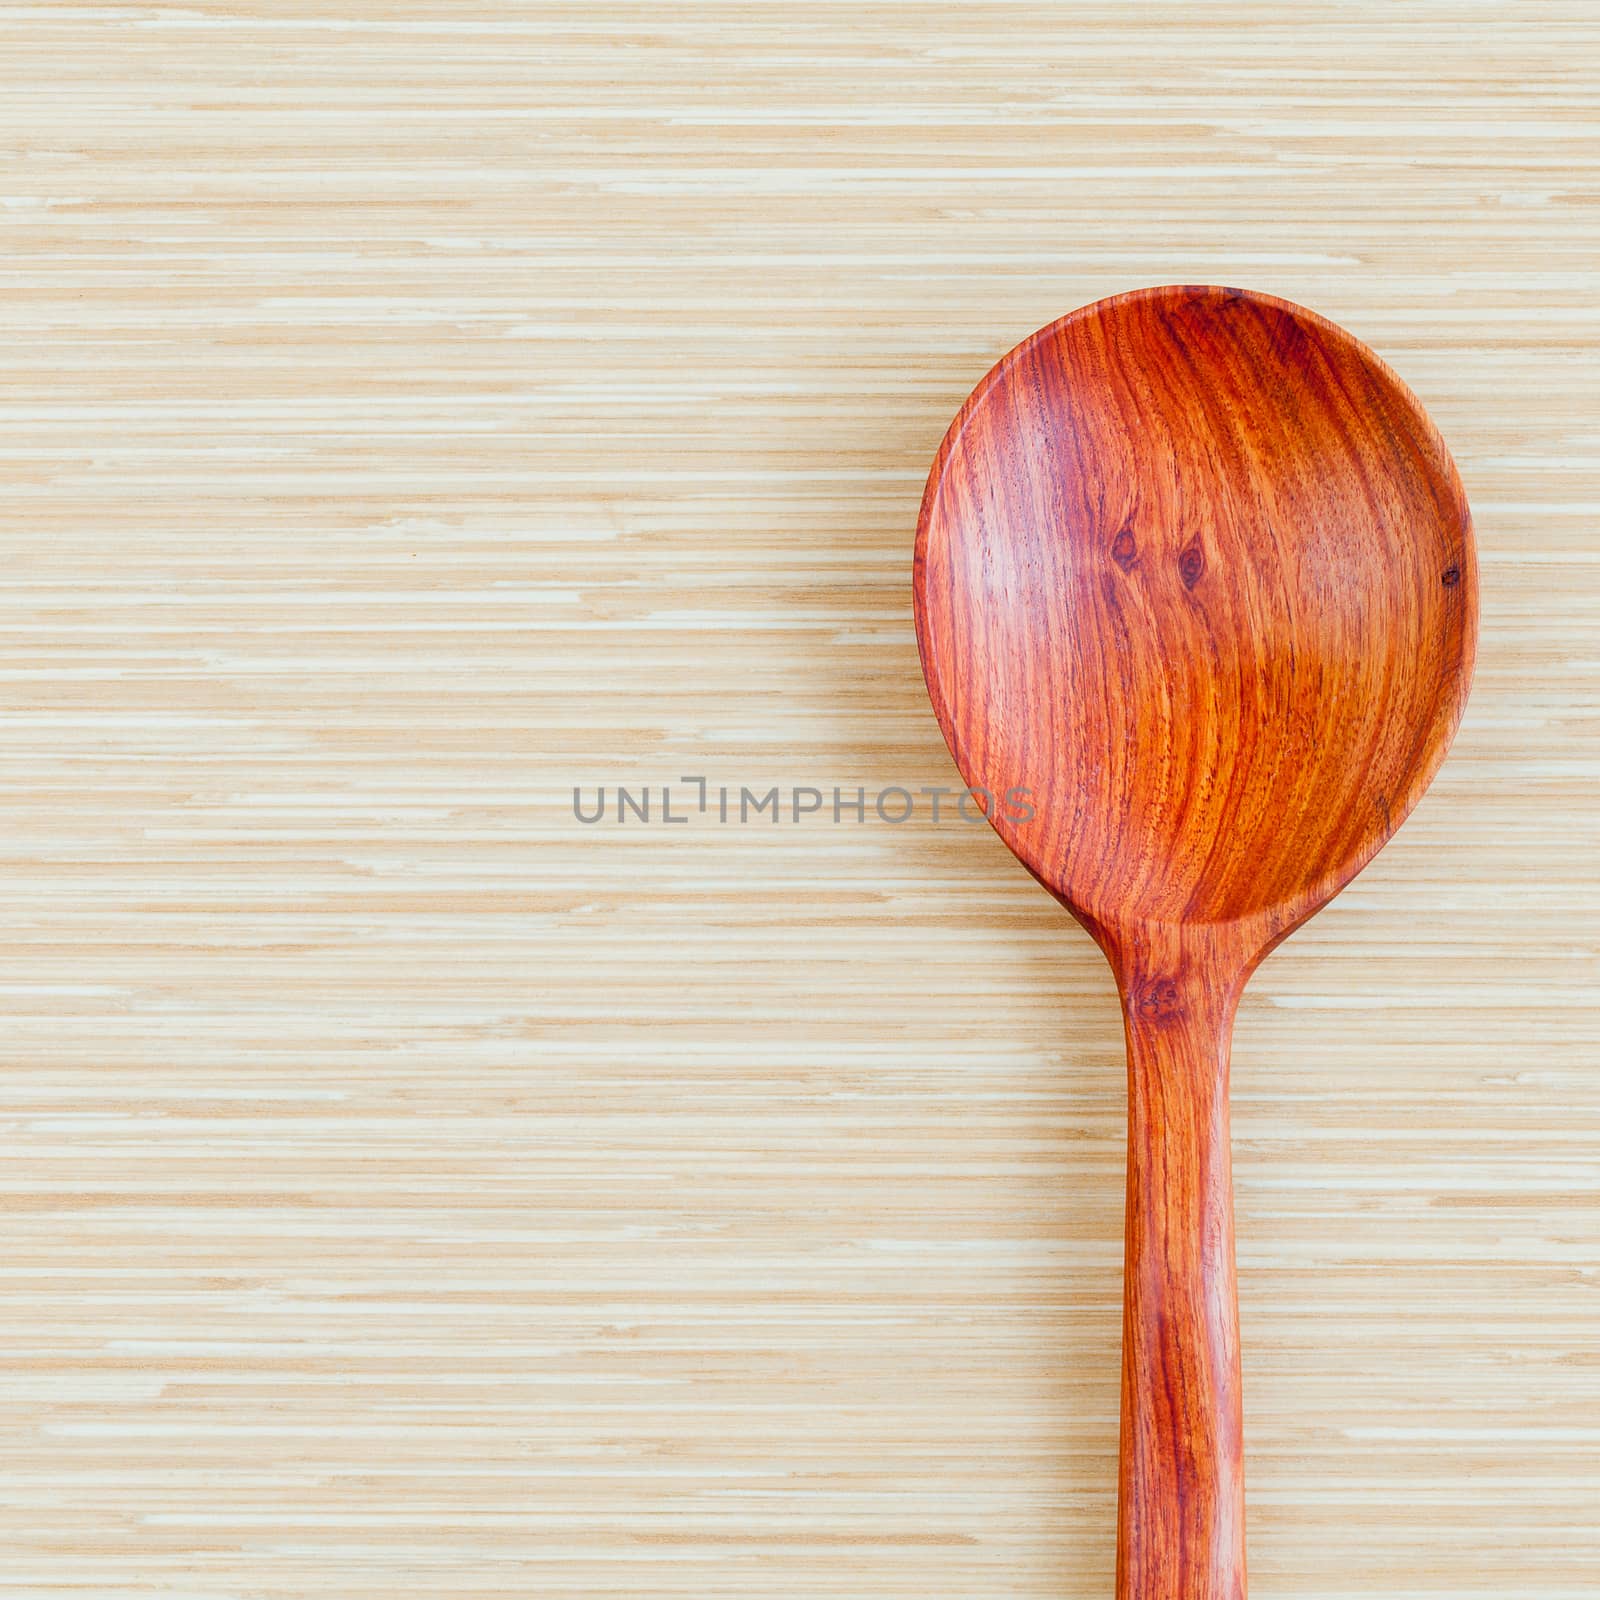 Wooden spoon on wooden background - concept for food and kitchen by kerdkanno